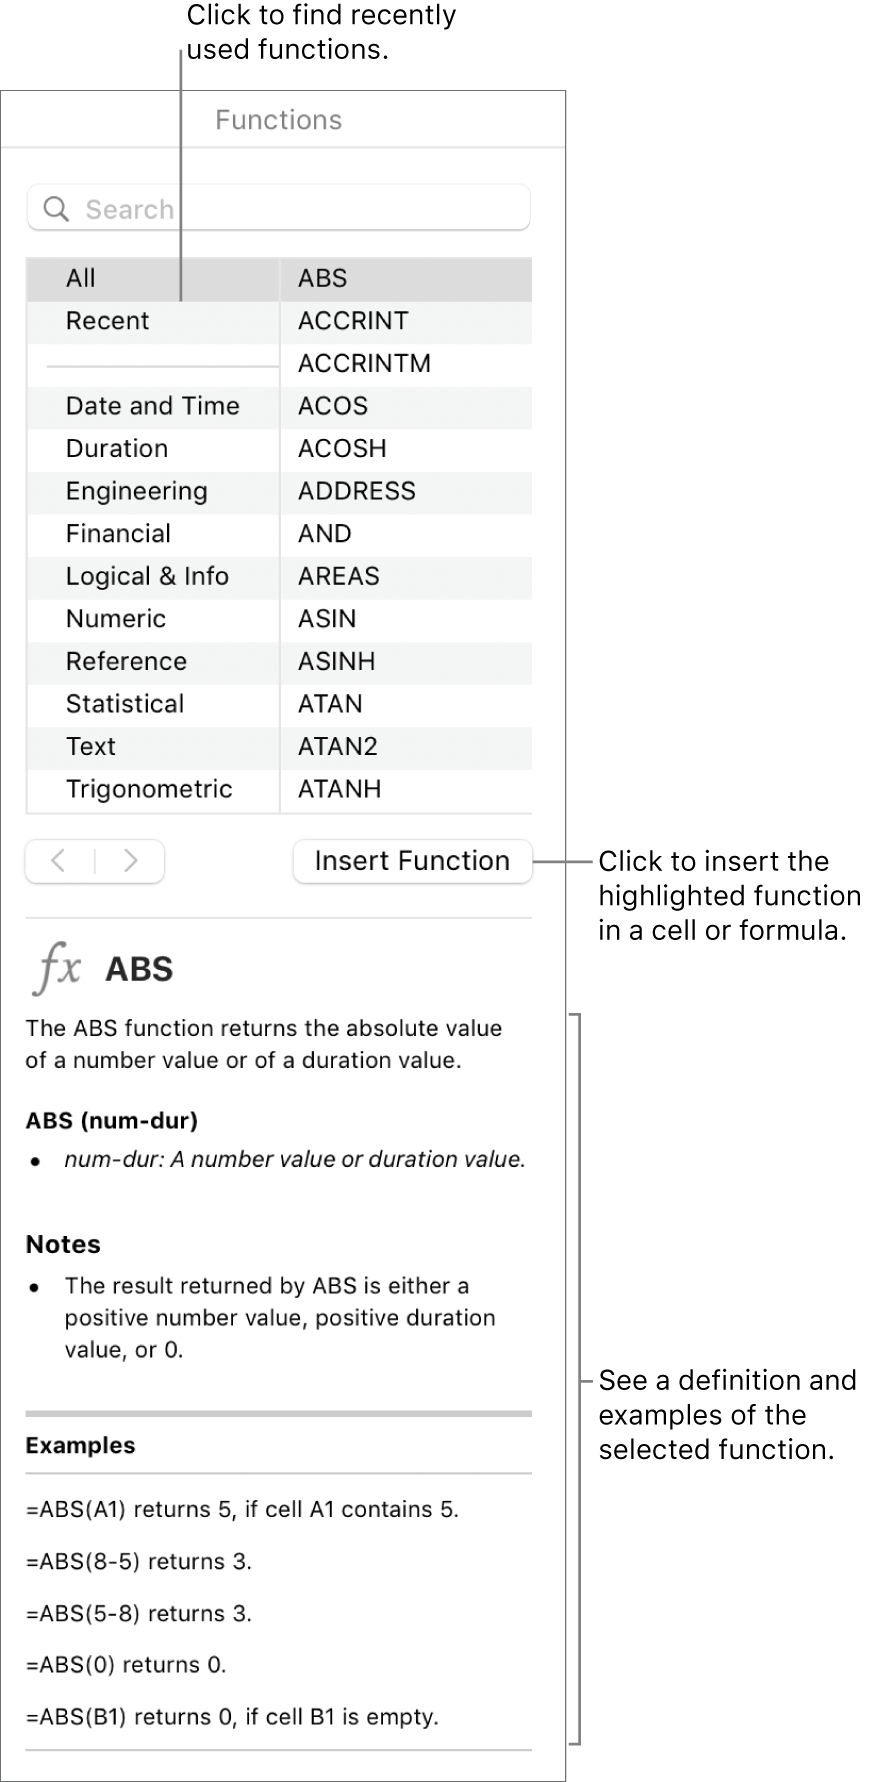 The Function Browser with callouts to recently used functions, the Insert Function button and the function definition.